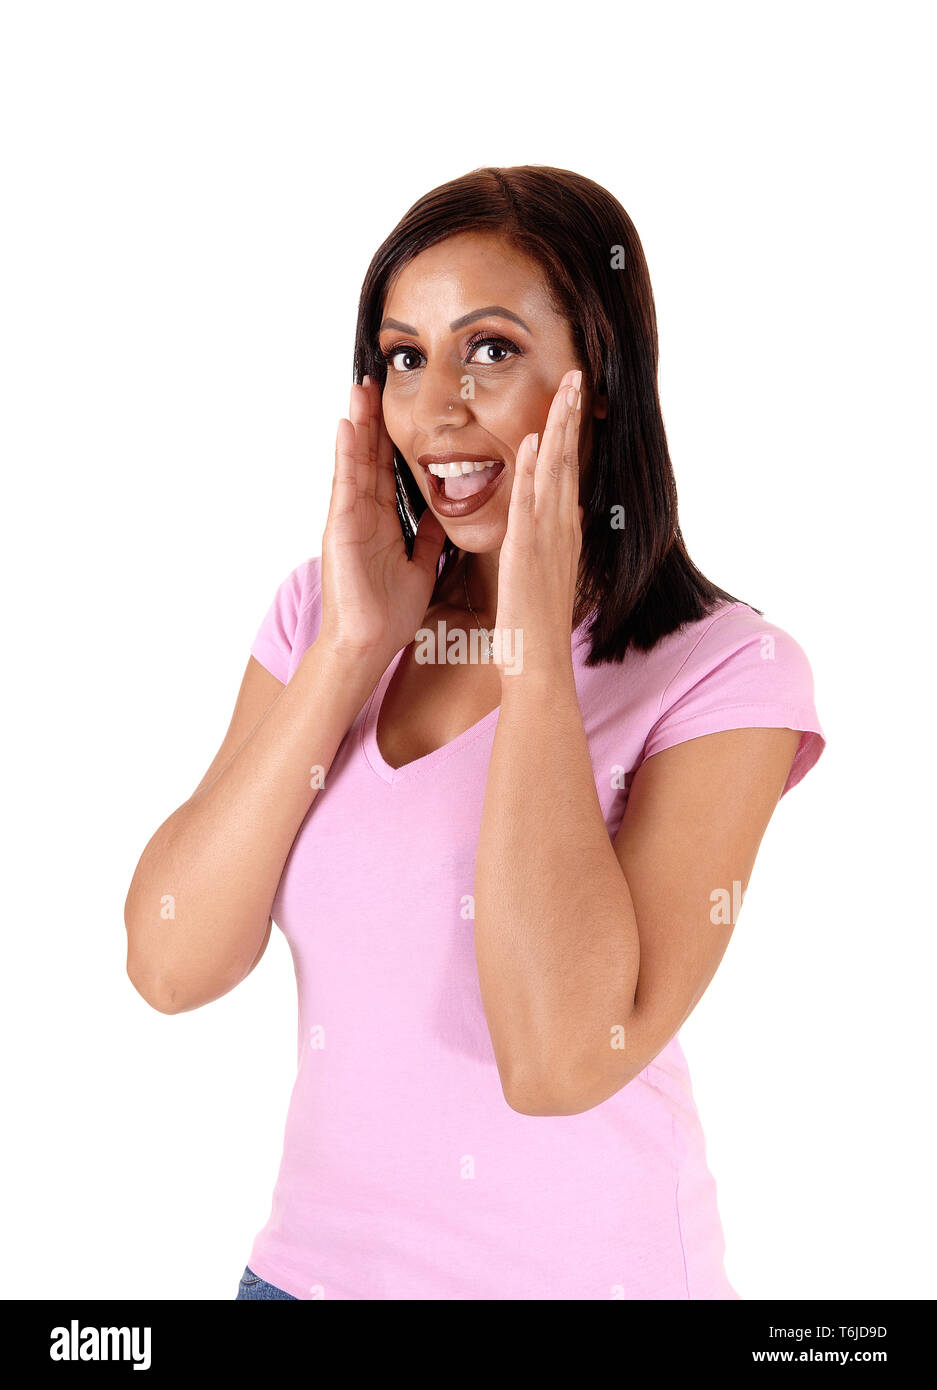 Happy woman holding her hands on face Stock Photo